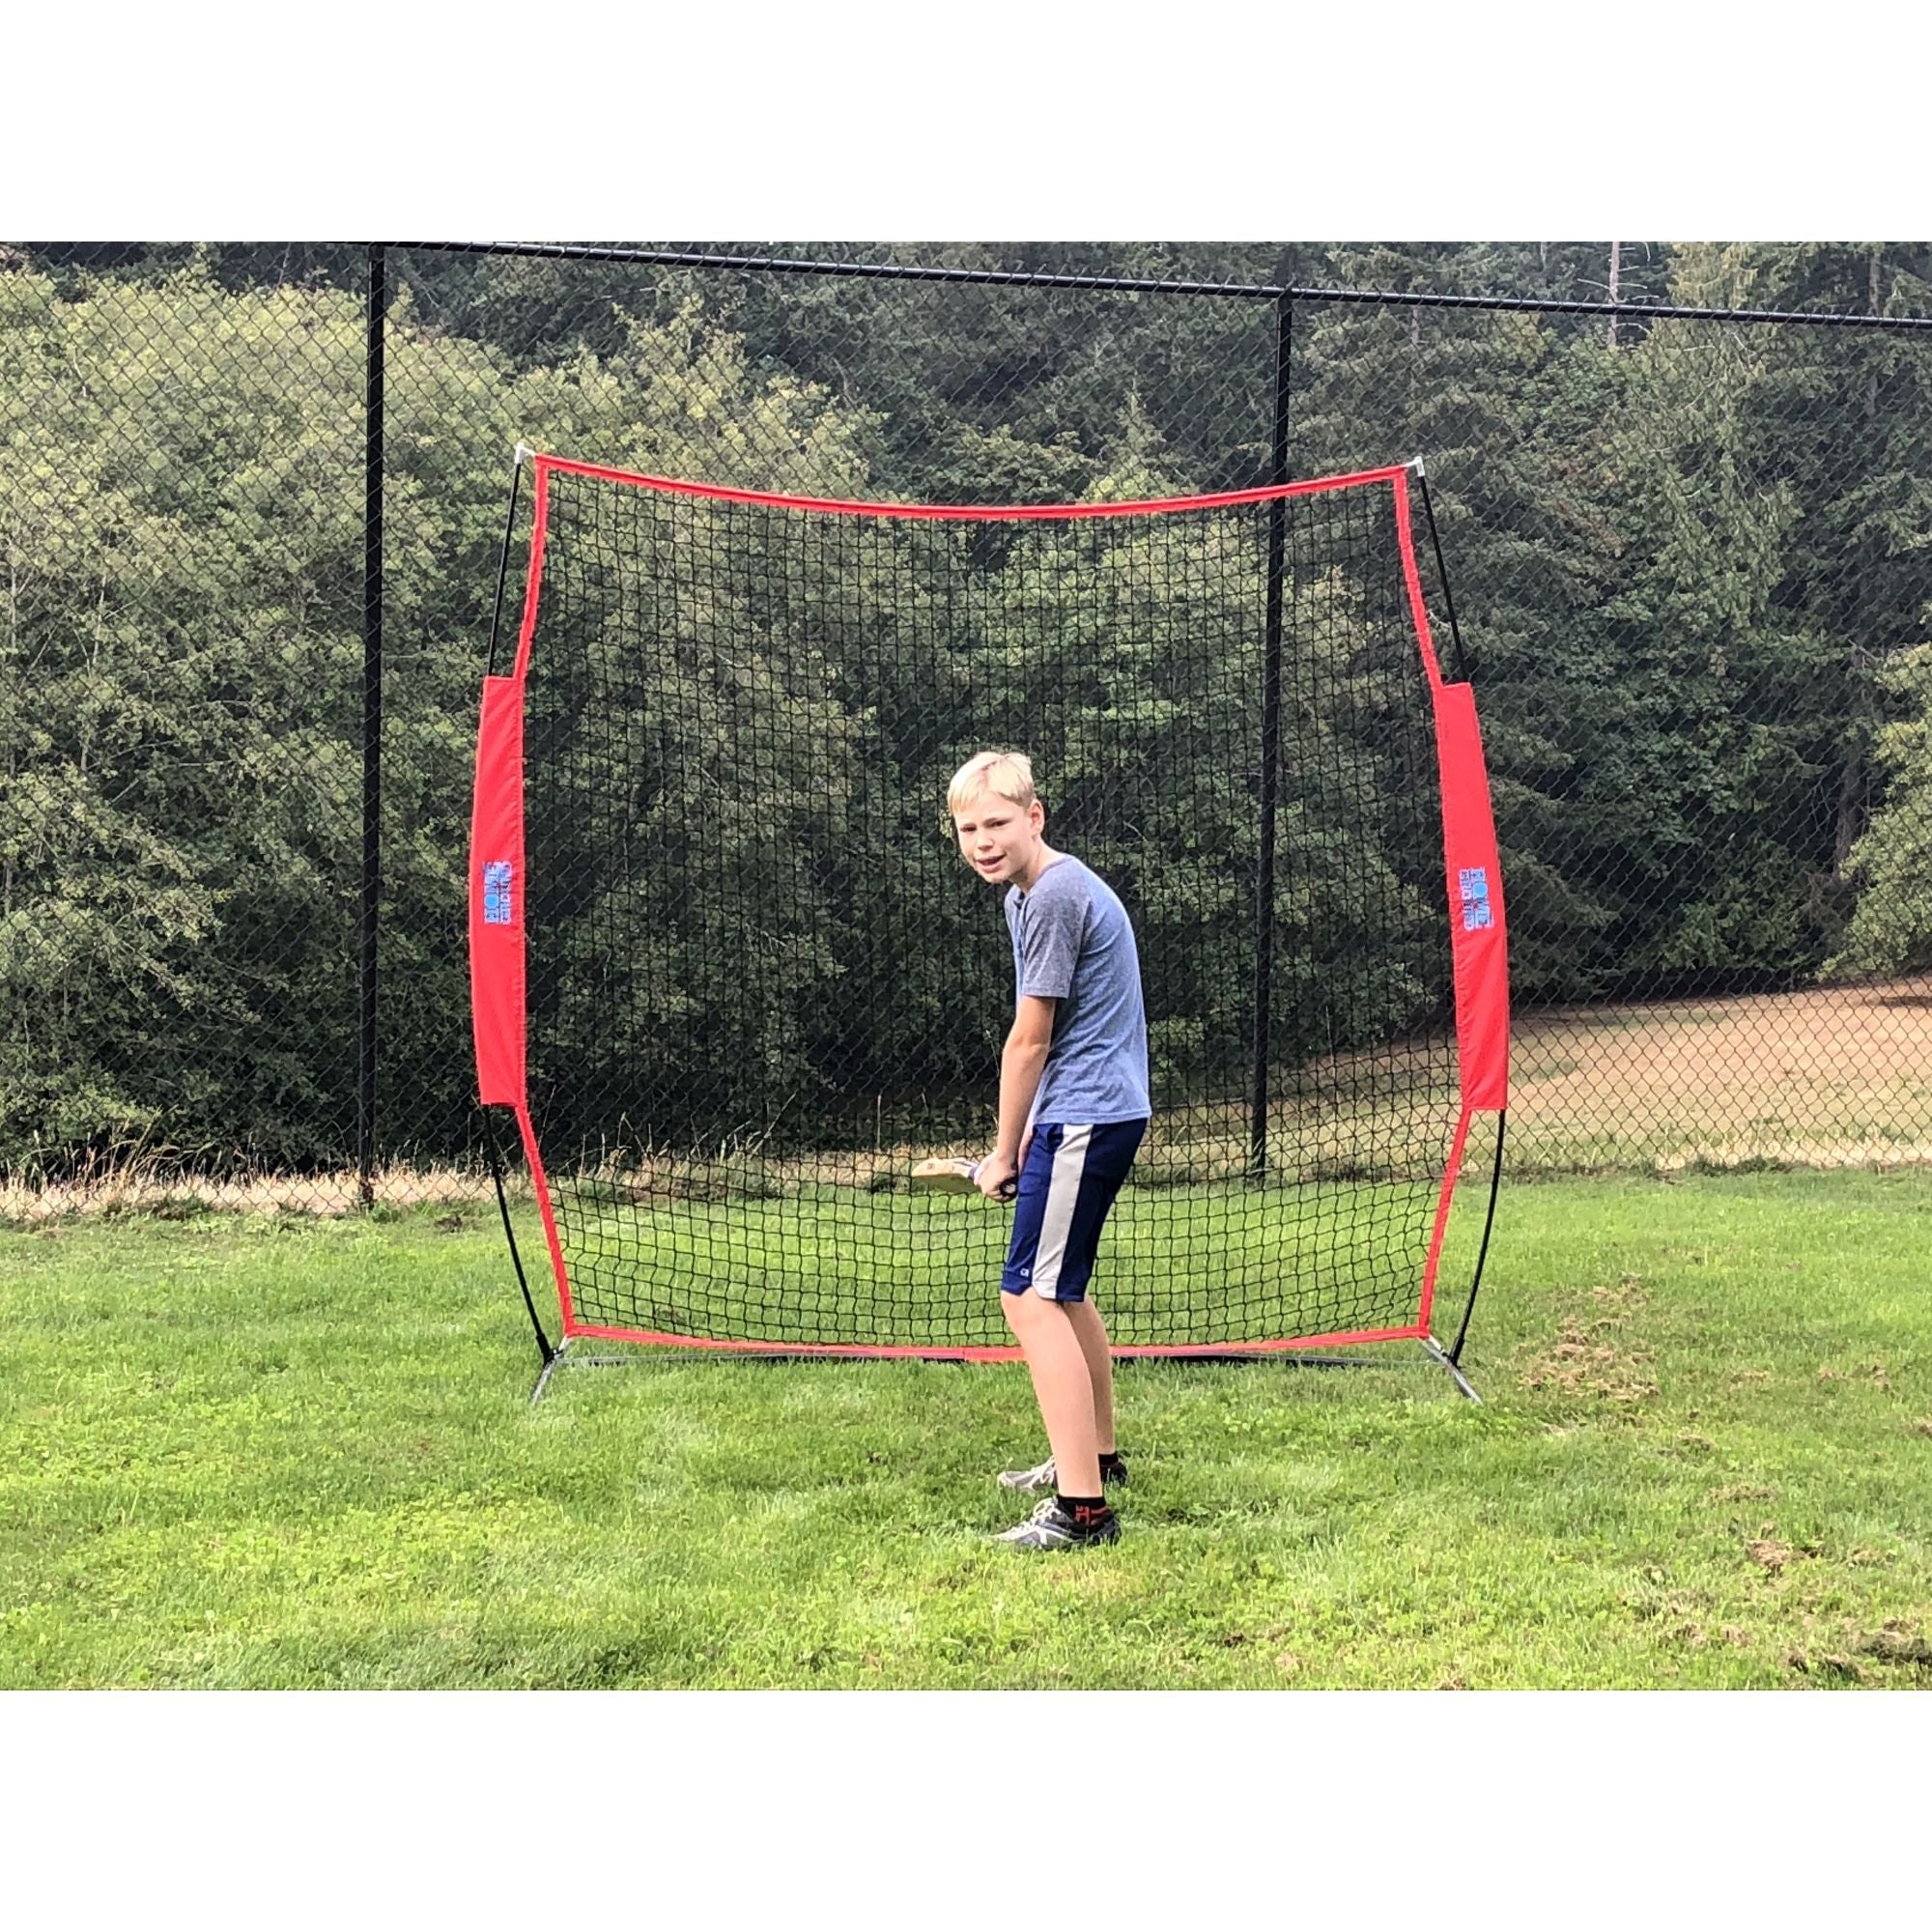 Paceman - Home Ground Back Stop Cricket Net